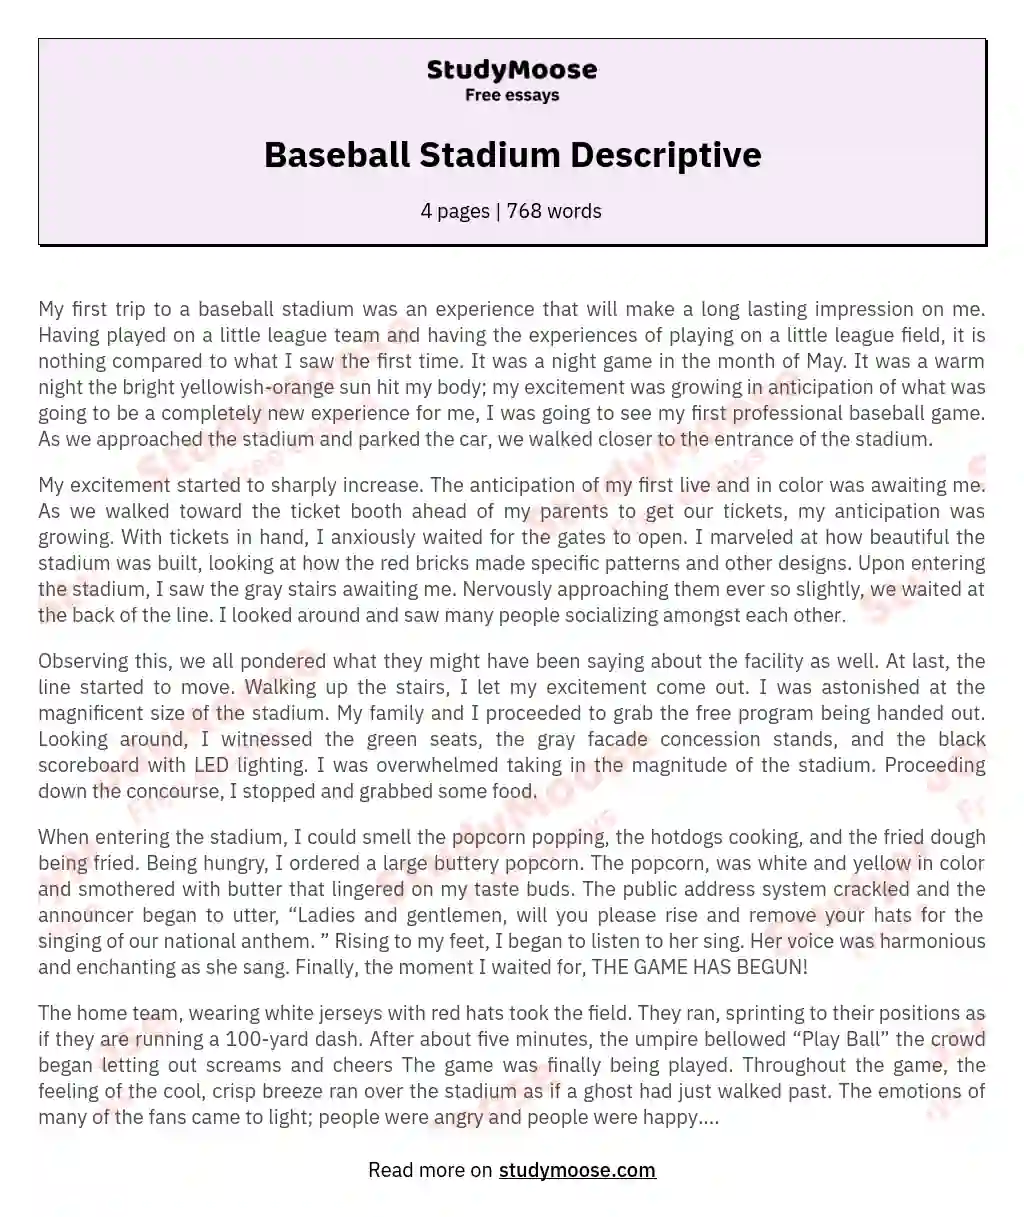 5 paragraph essay about baseball